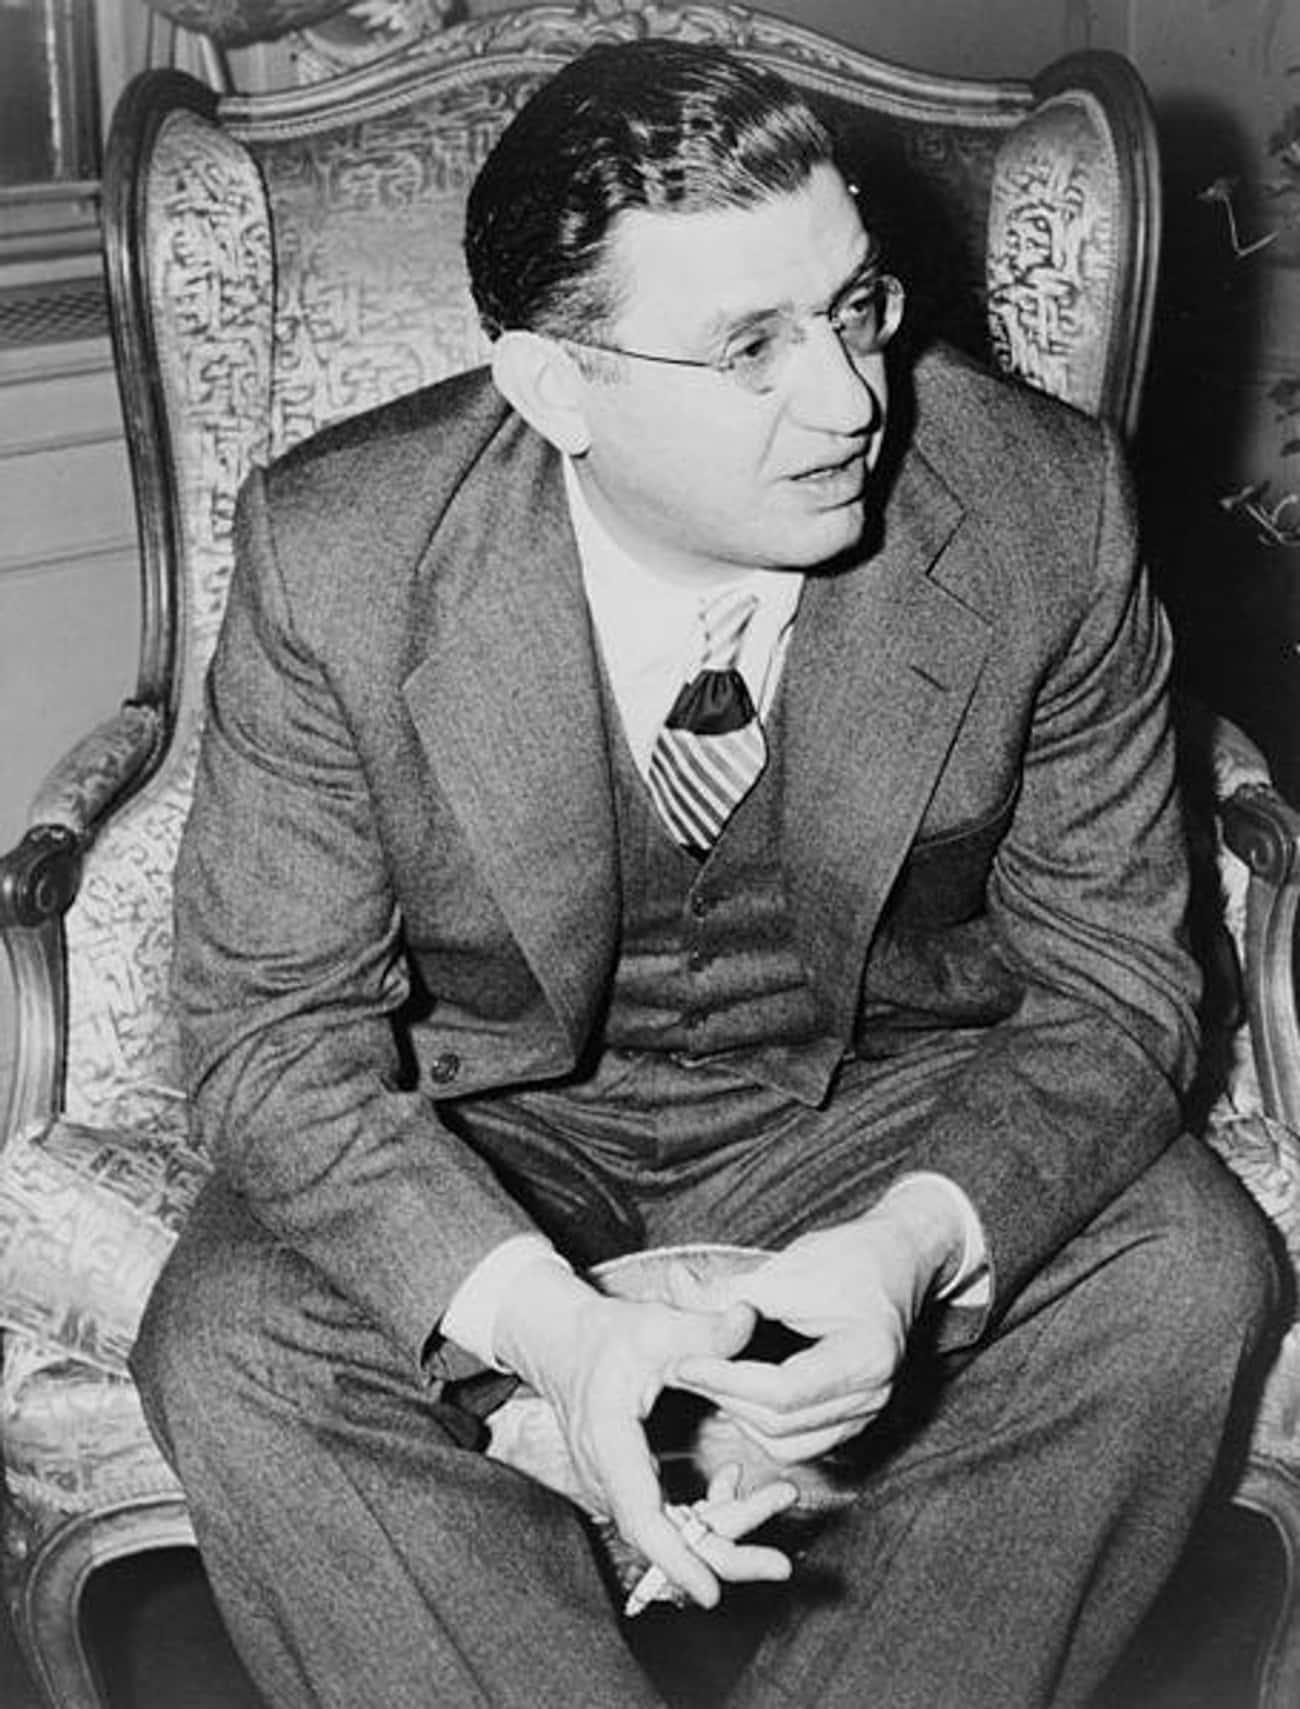 When Temple Was 17, Producer David O. Selznick Tried To Assault Her